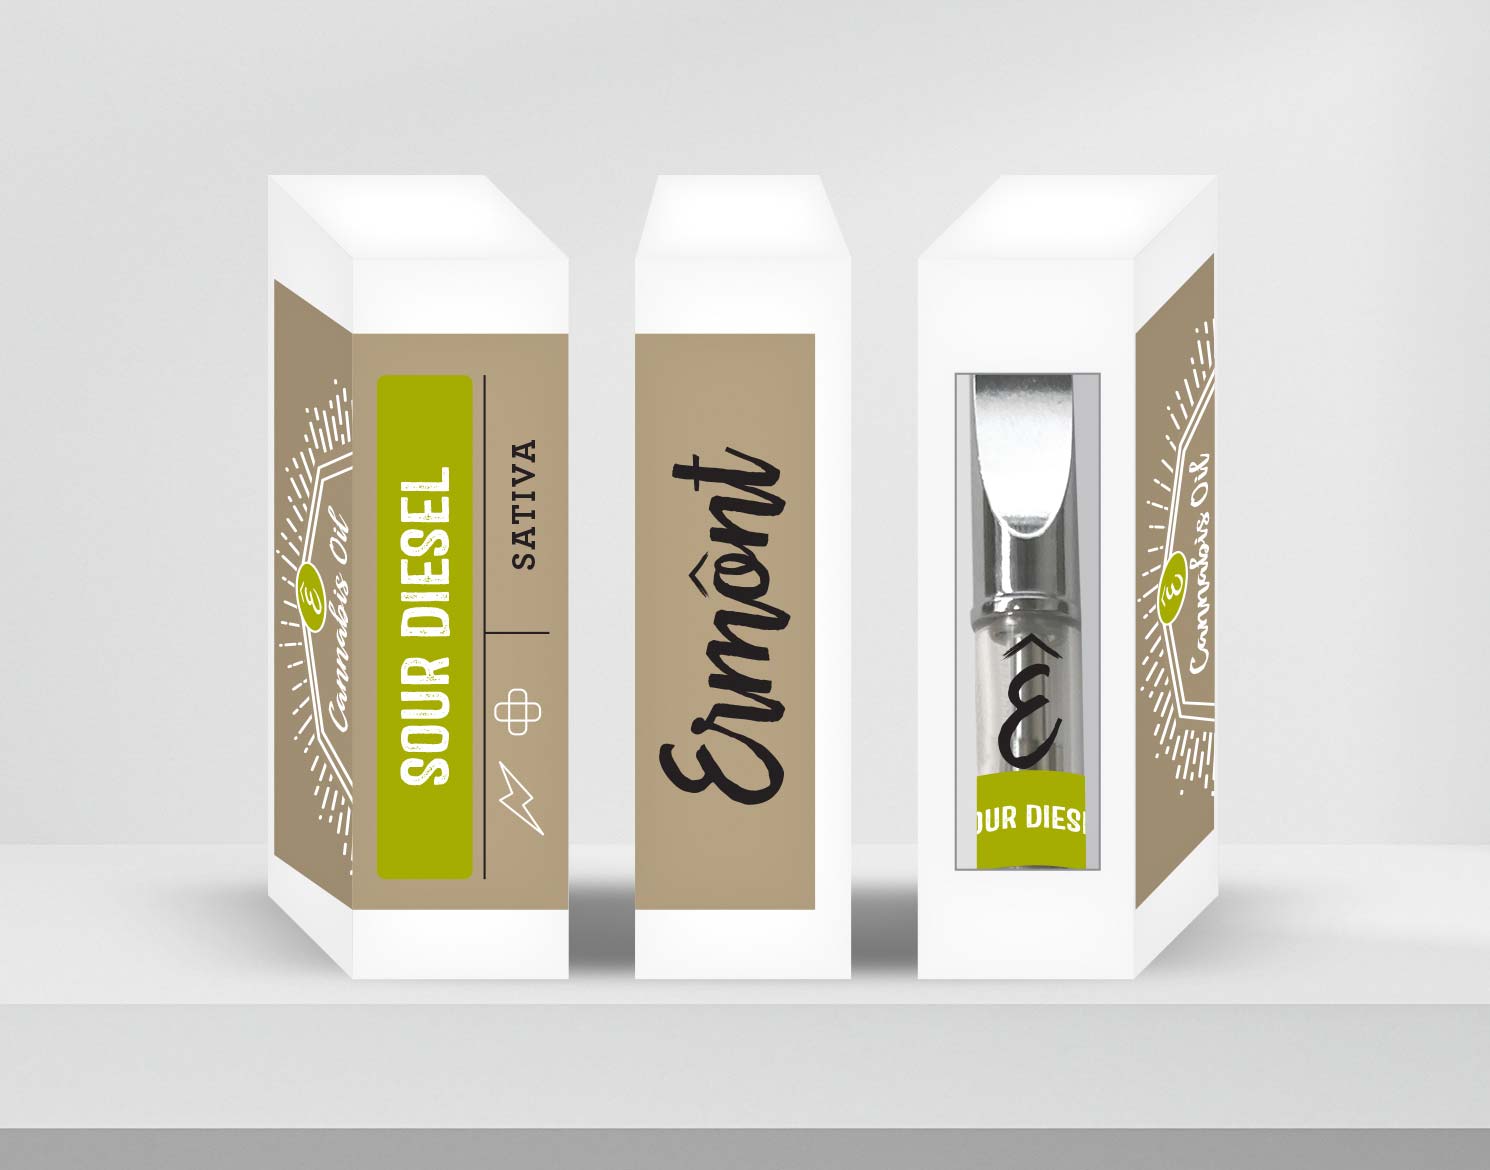 Ermont logo applied to vape packaging